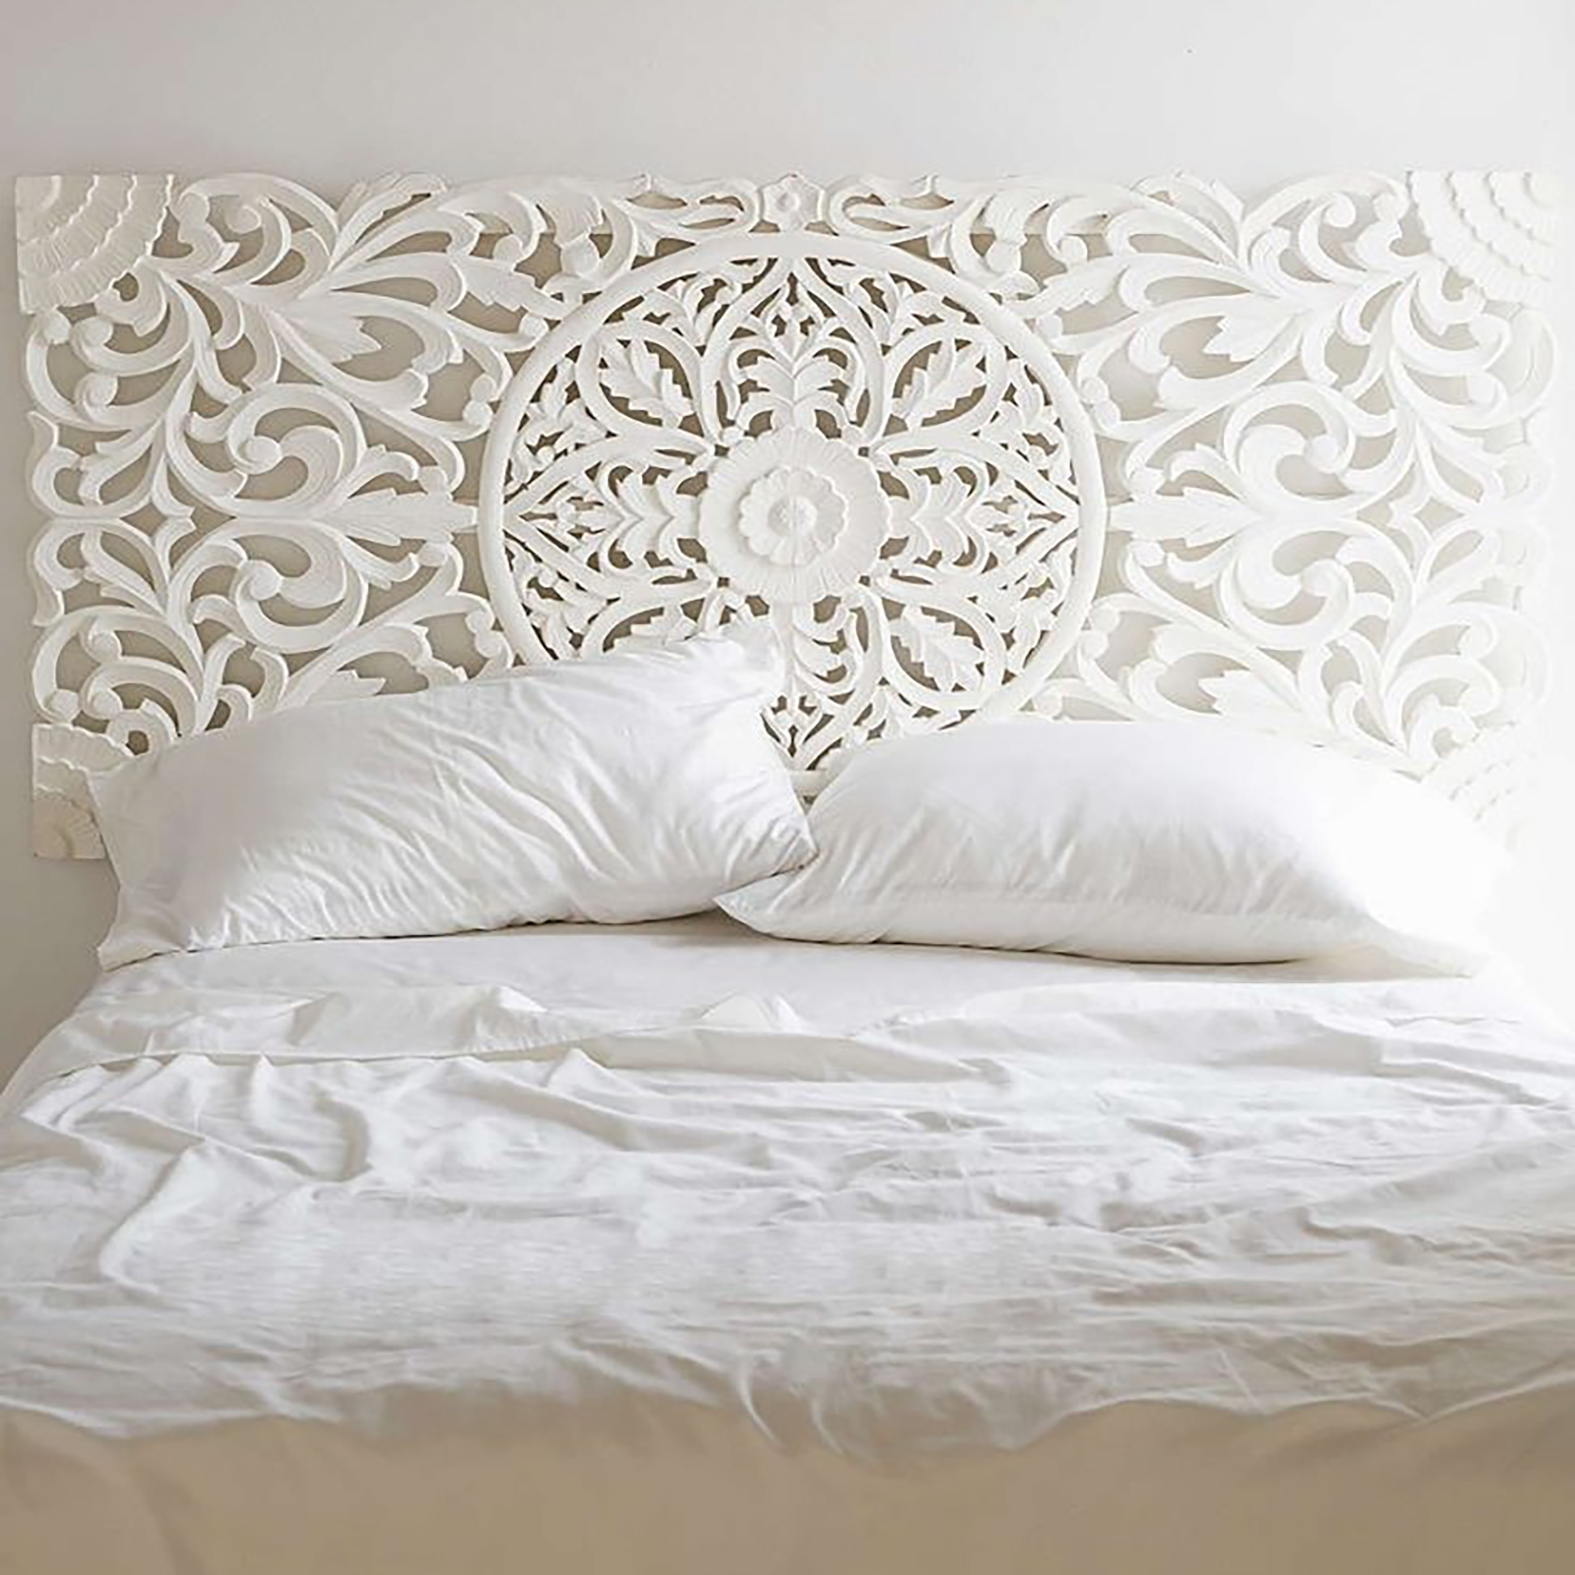 tete-de-lit-style-marocain-avec-sienna-headboard-could-possibly-make-happen-with-the-laser-